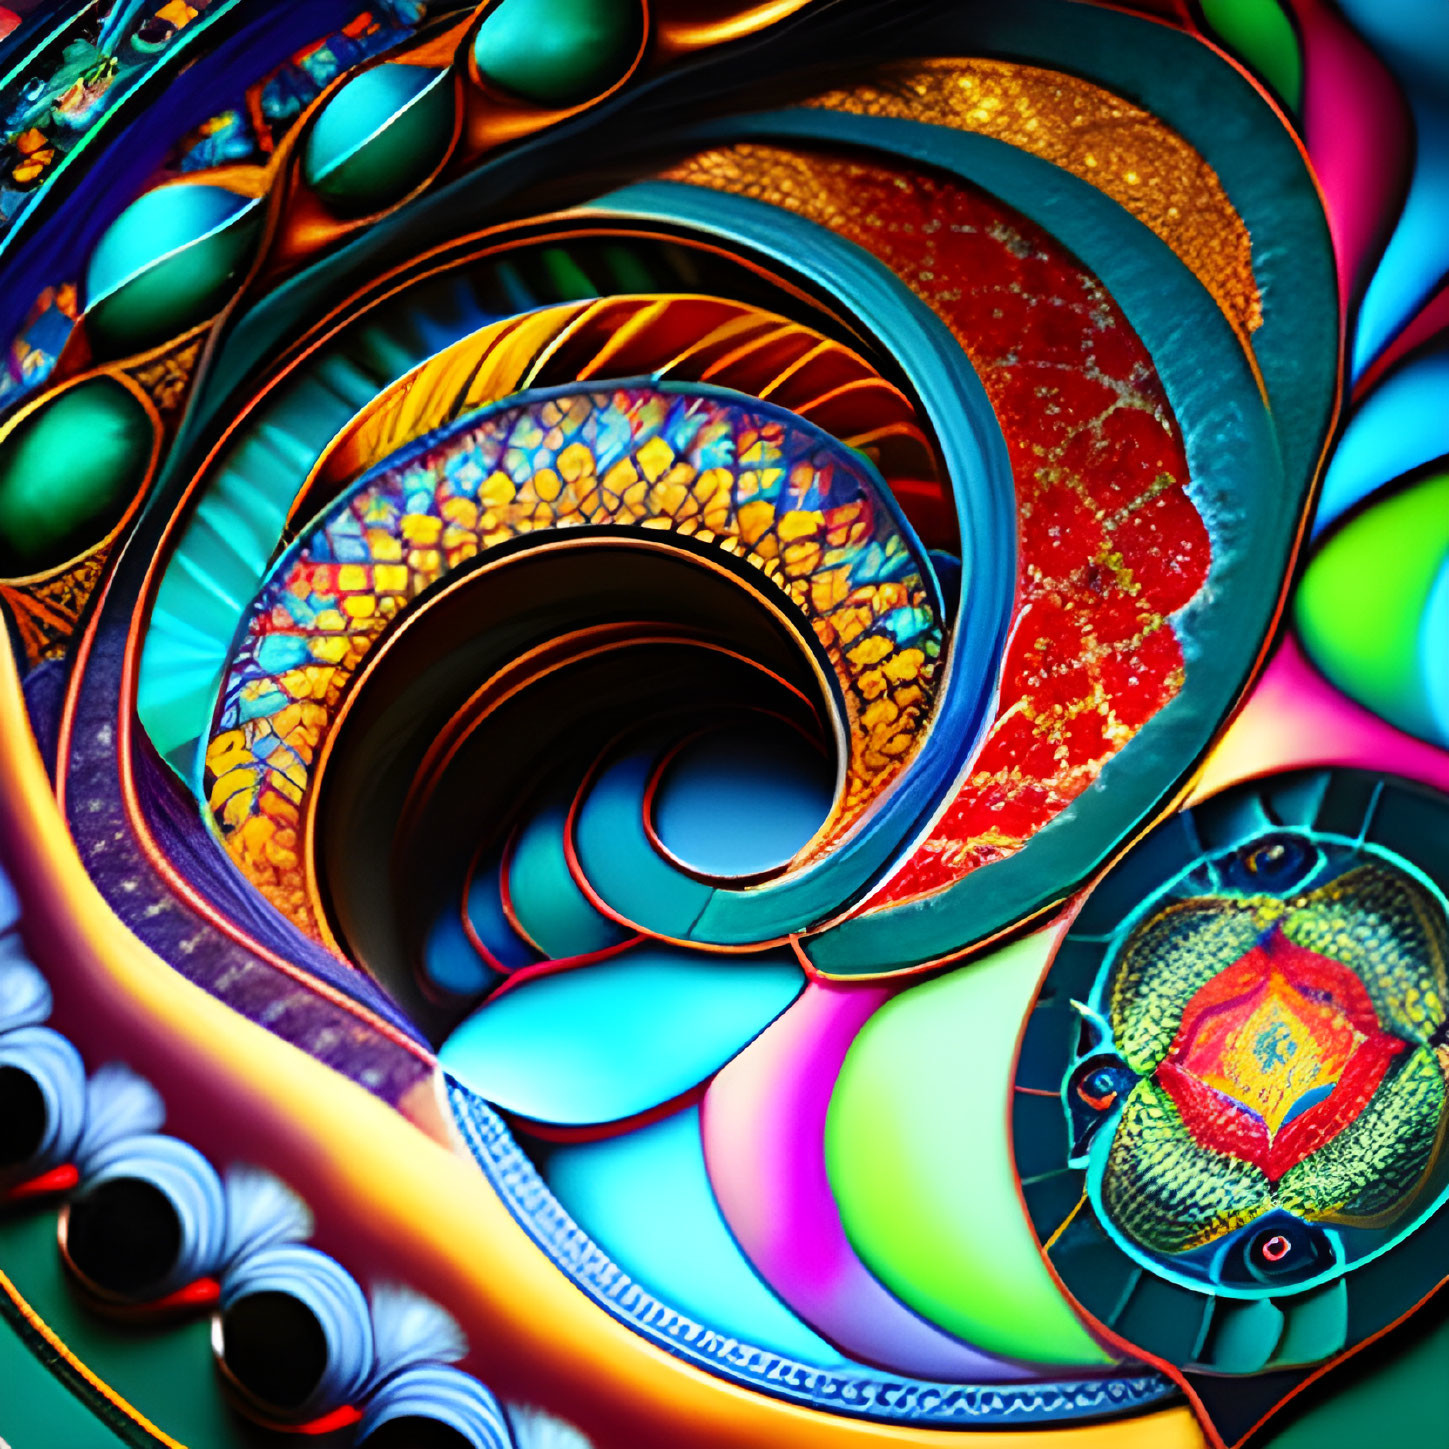 Colorful Digital Fractal Art with Intricate Spiral Patterns